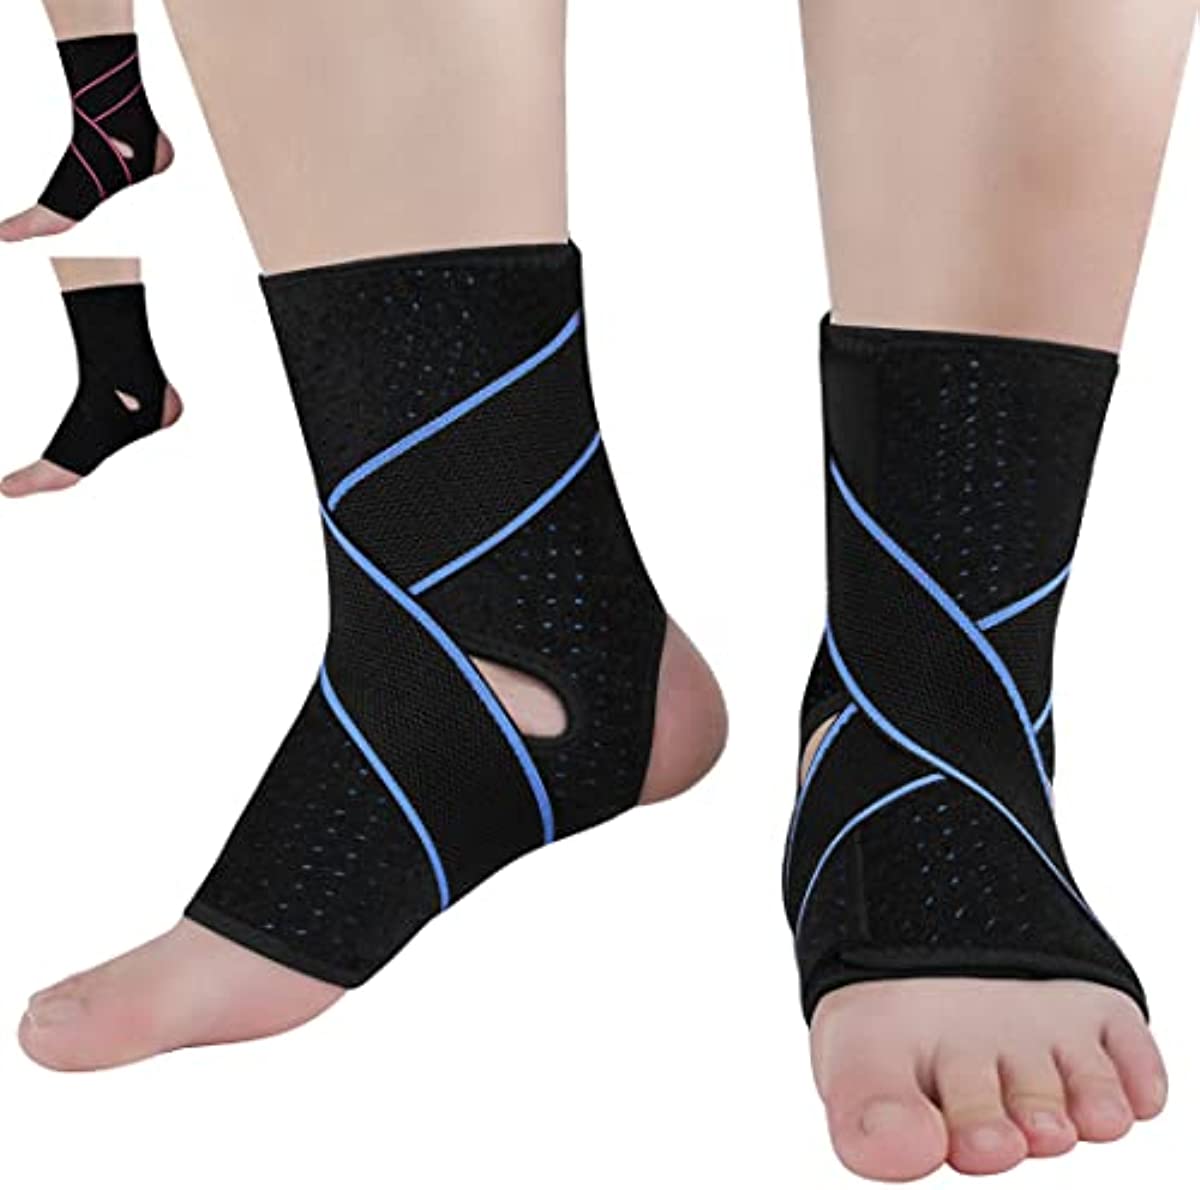 Vinaco Ankle Braces, 1 Pair Adjustable Compression Ankle Brace for Sprained Ankle, Strong Support & Breathable Ankle Support for Injury Recovery, Joint Pain, Swelling,Ankle Braces for Man & Women